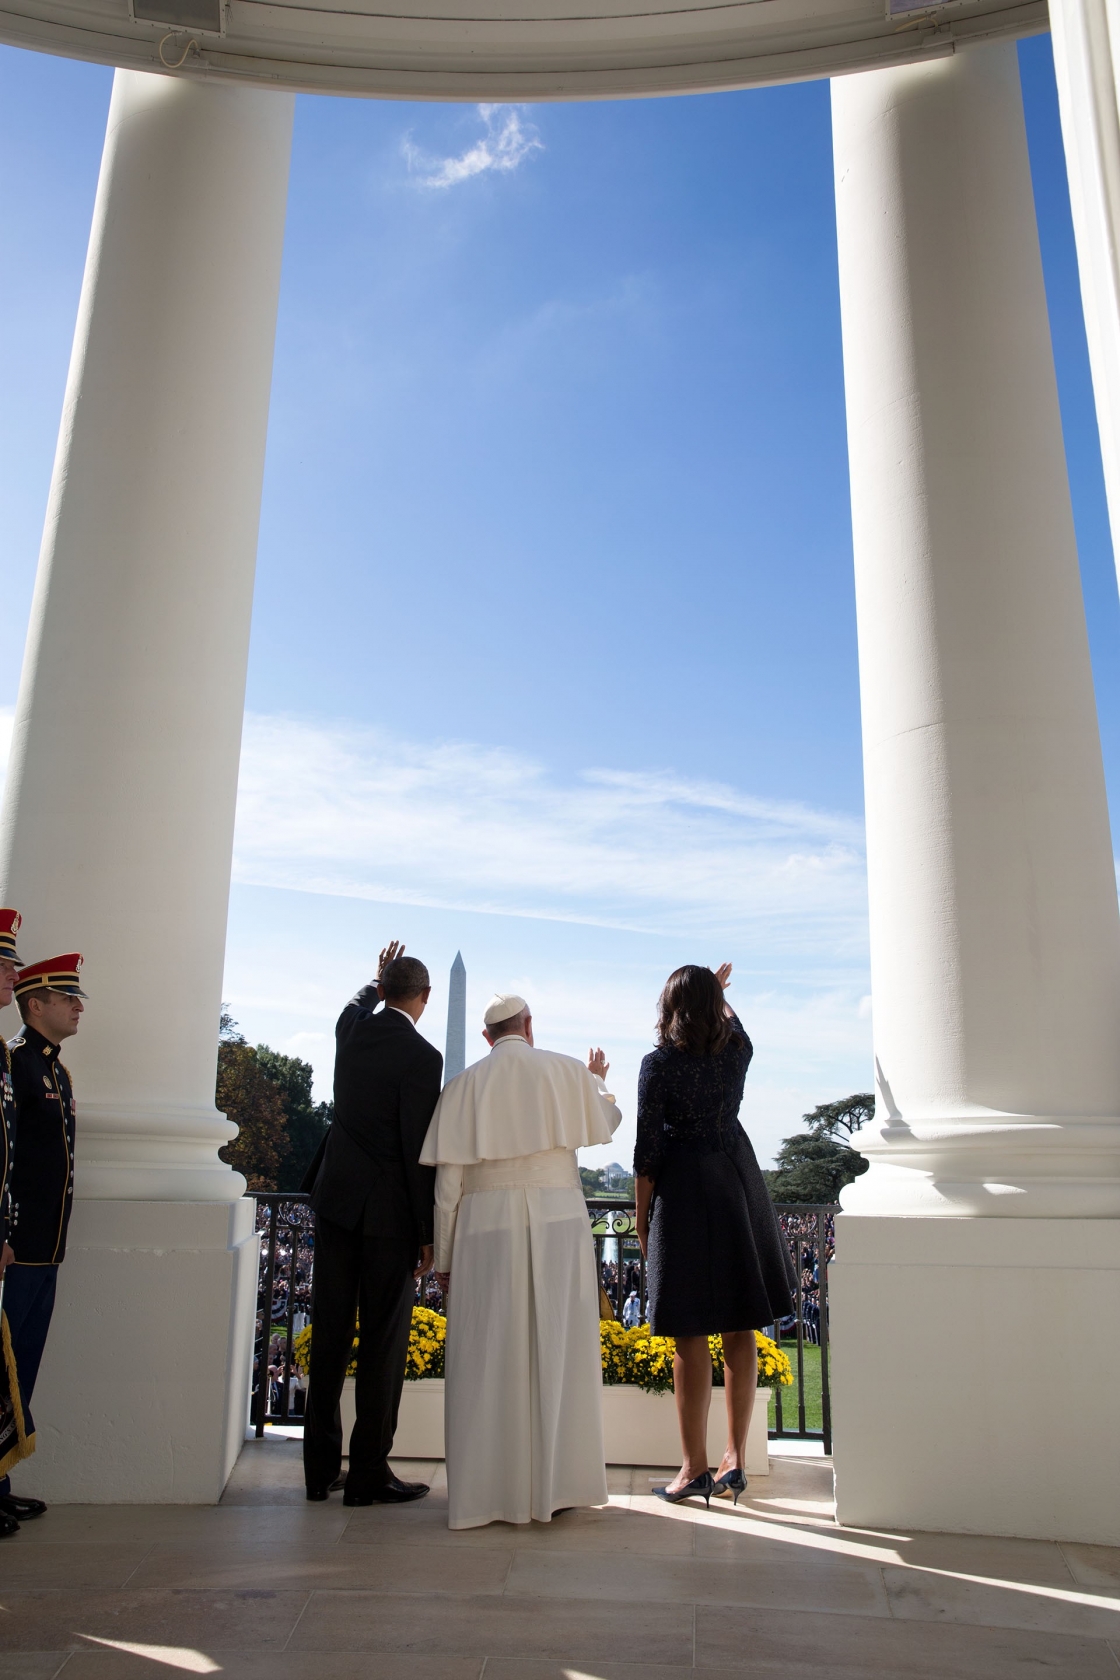 The Pope waves from the Blue Room Balcony with the President and First Lady. (Official White House Photo by Pete Souza)